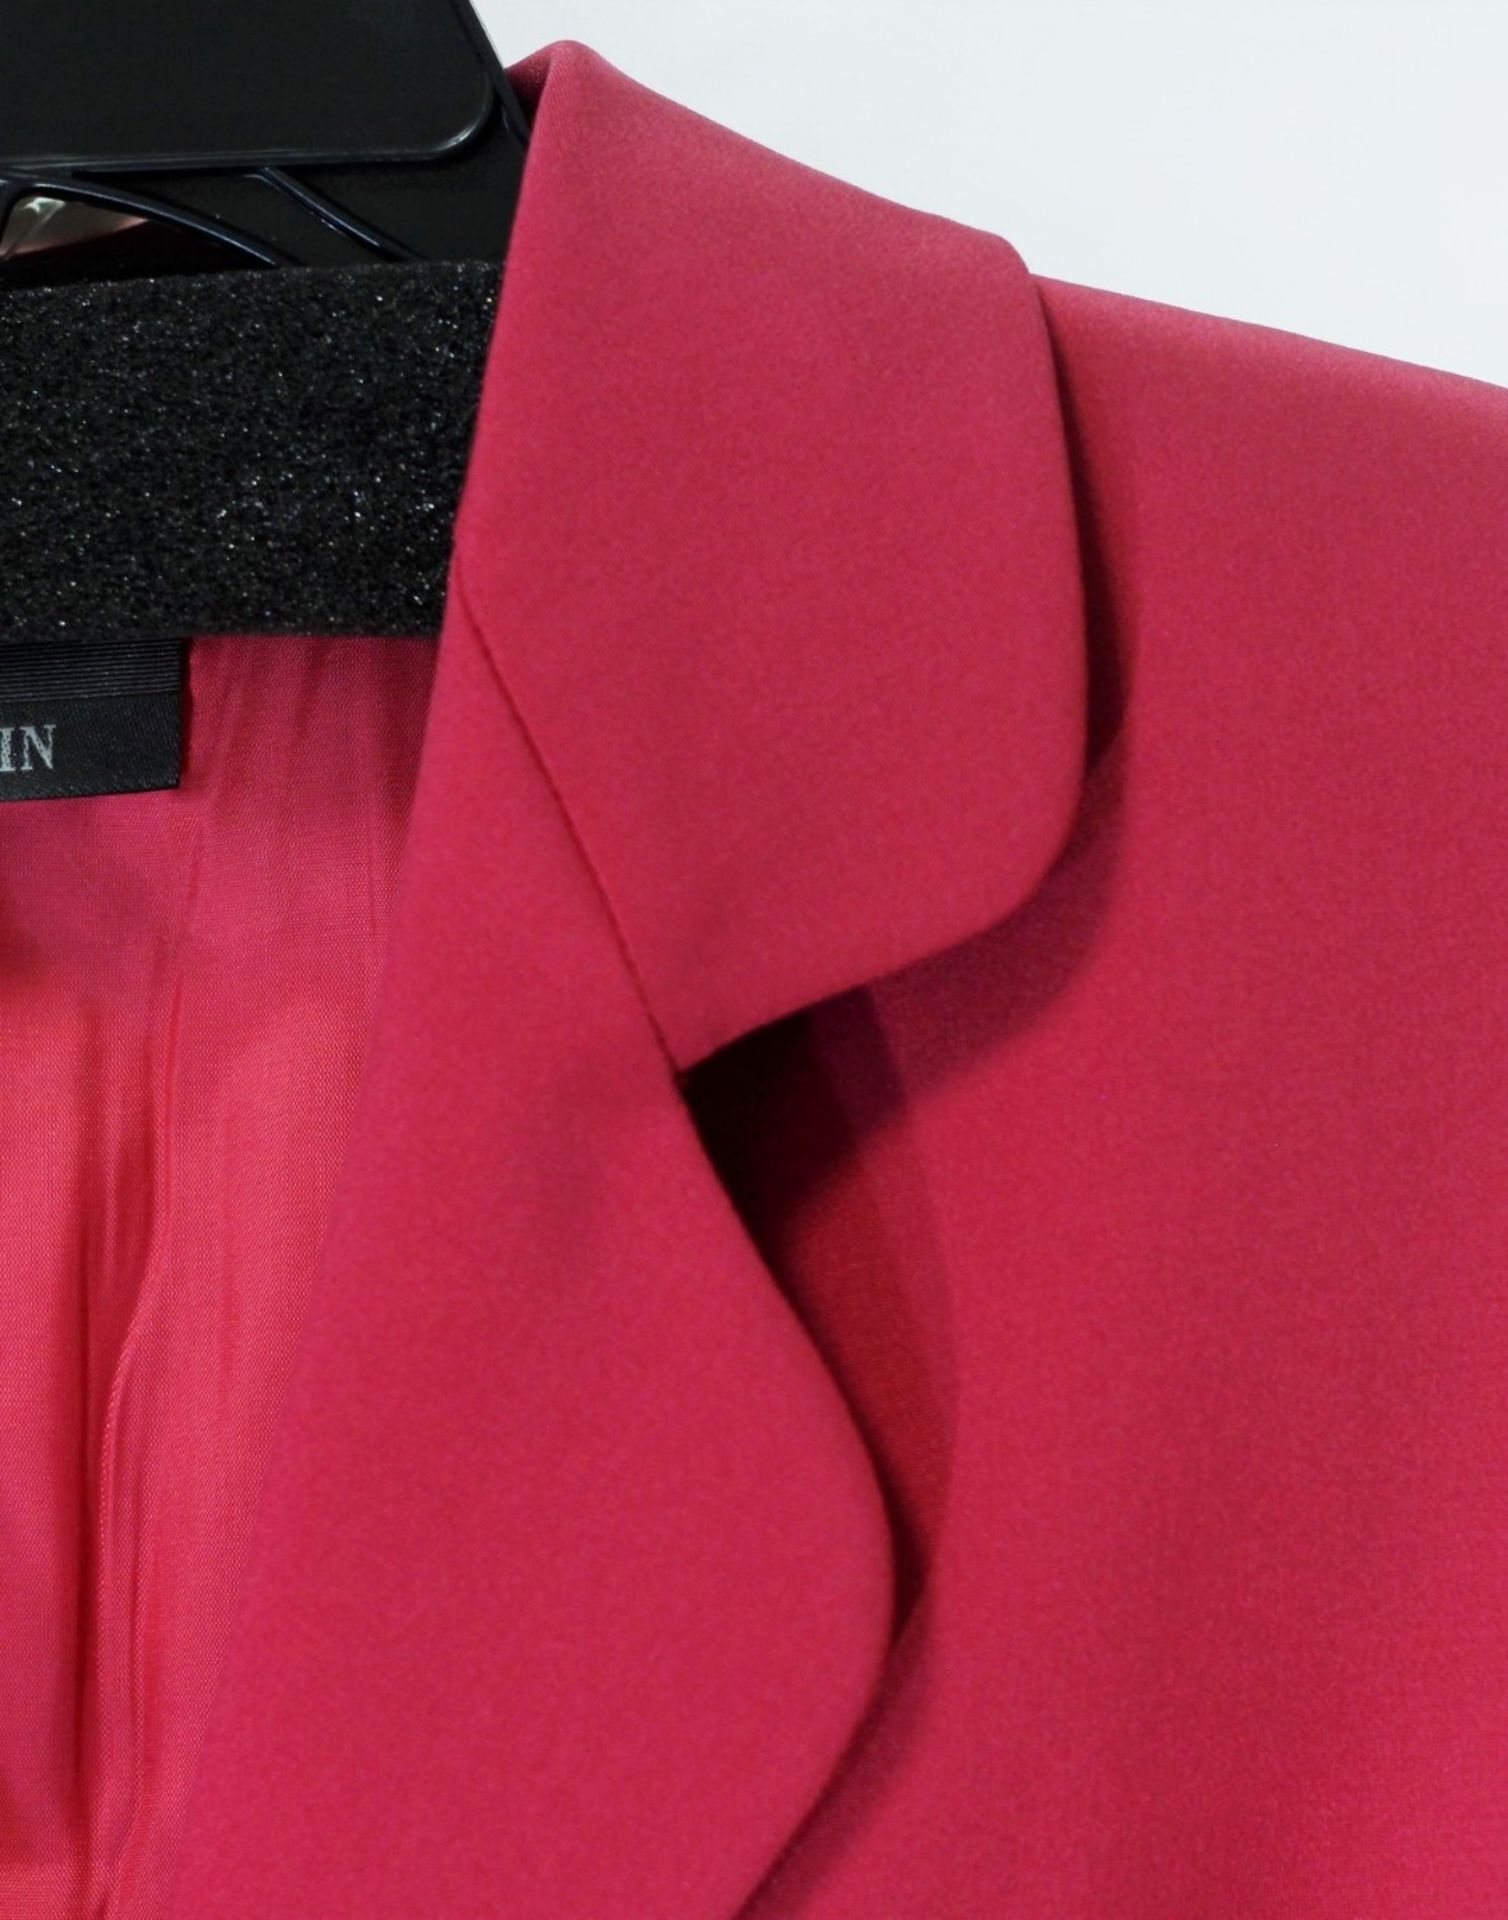 1 x Anne Belin Fuscia Jacket - Size: 18 - Material: 100% Silk - From a High End Clothing Boutique In - Image 9 of 9